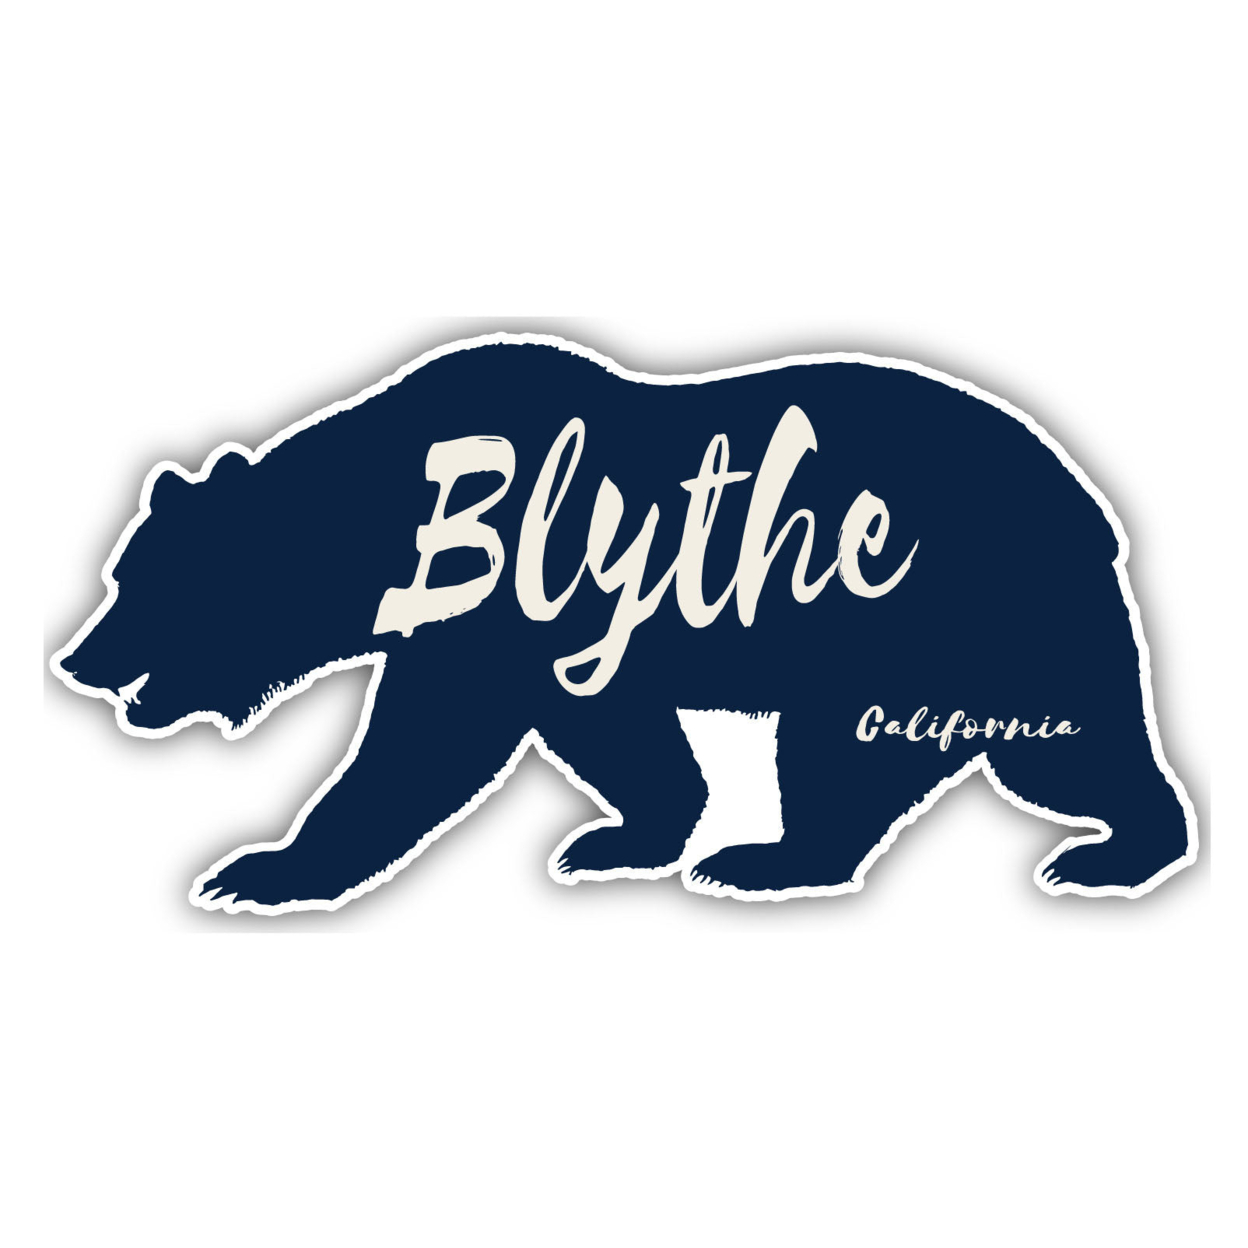 Blythe California Souvenir Decorative Stickers (Choose Theme And Size) - 4-Pack, 4-Inch, Bear